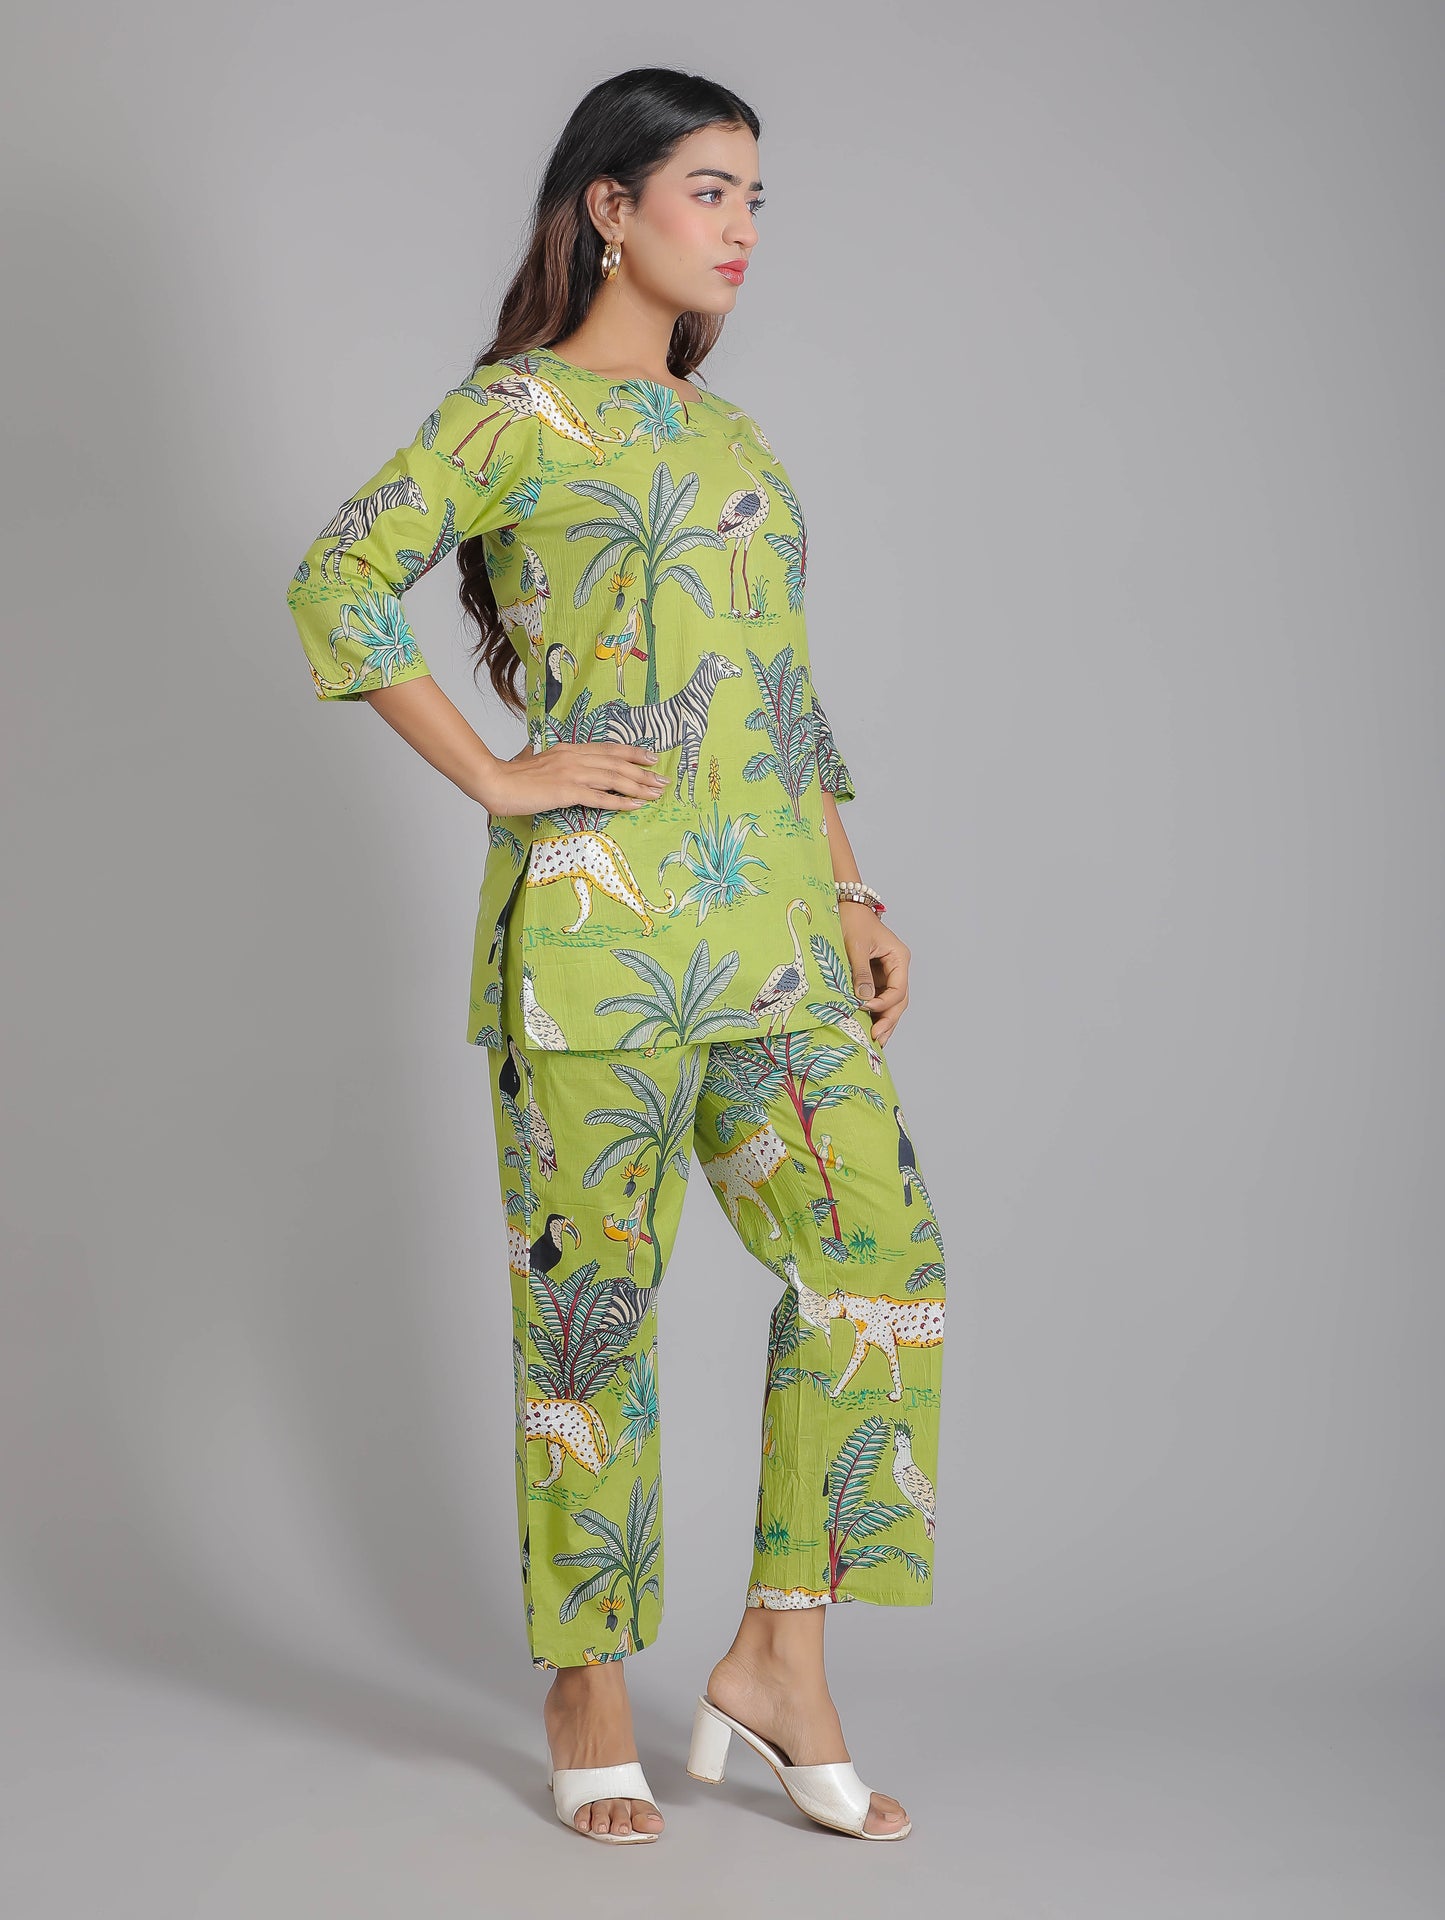 Tropical Forest Motifs on Green Cotton Lounge Set for Women